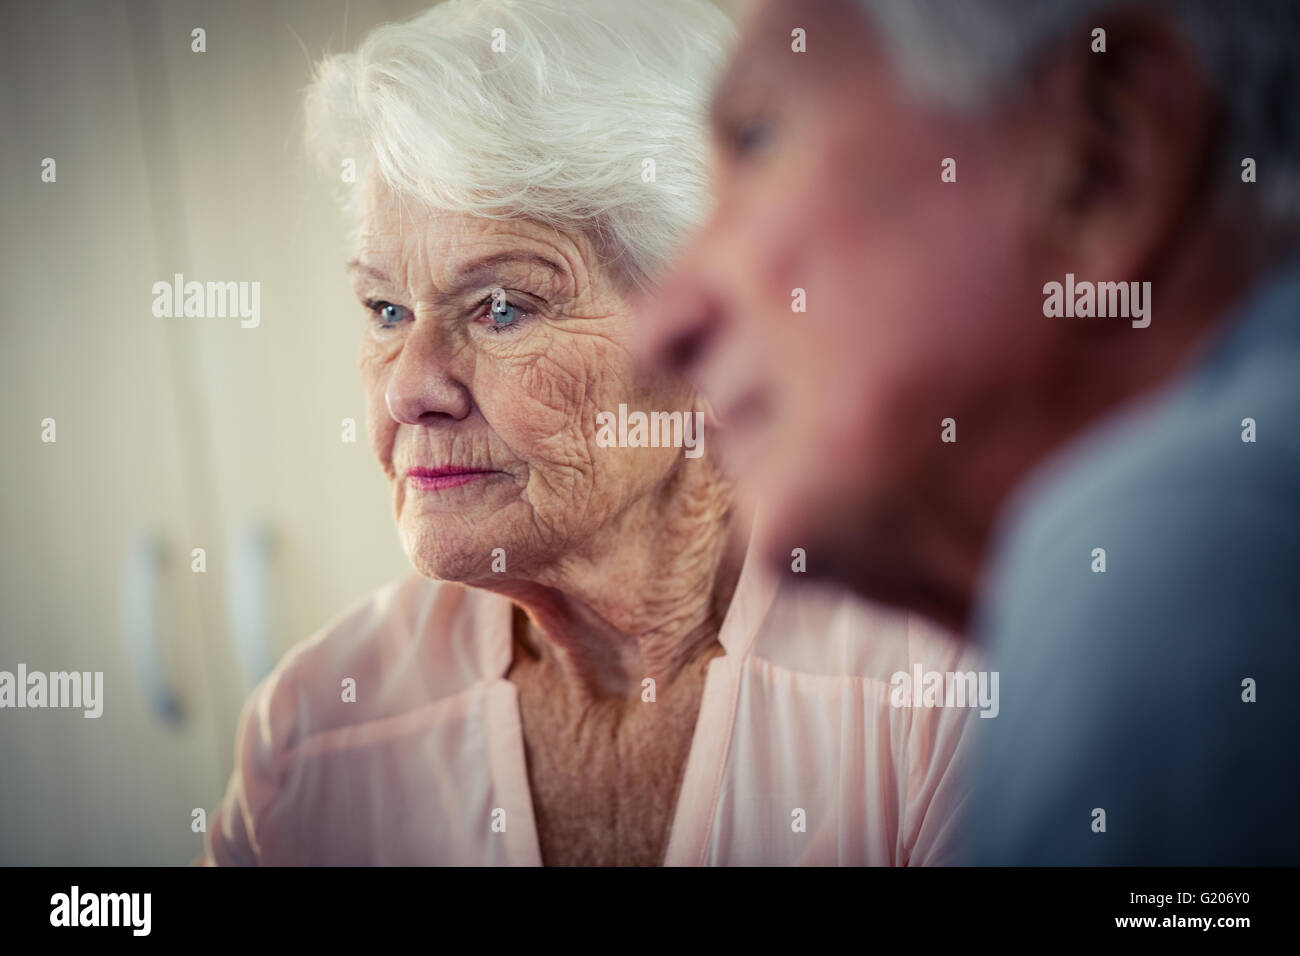 Pensioners interacting Stock Photo